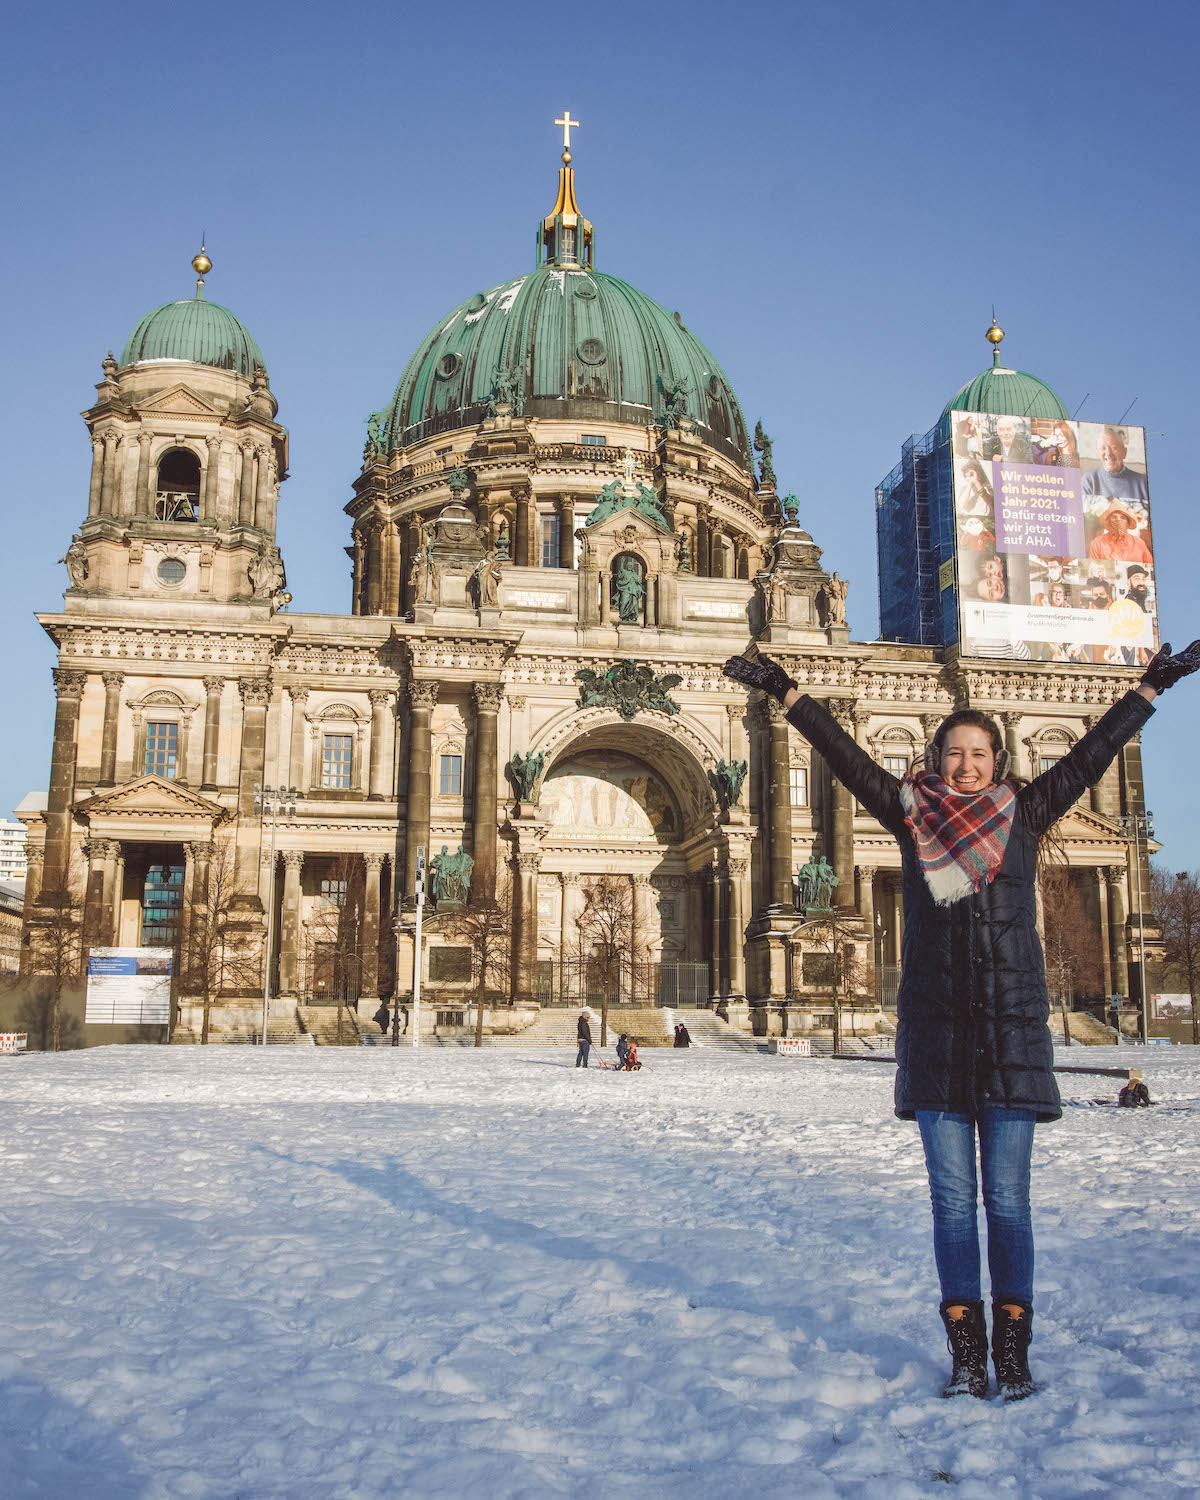 Woman smiling with hands raised in front of the Berliner Dom, in winter.